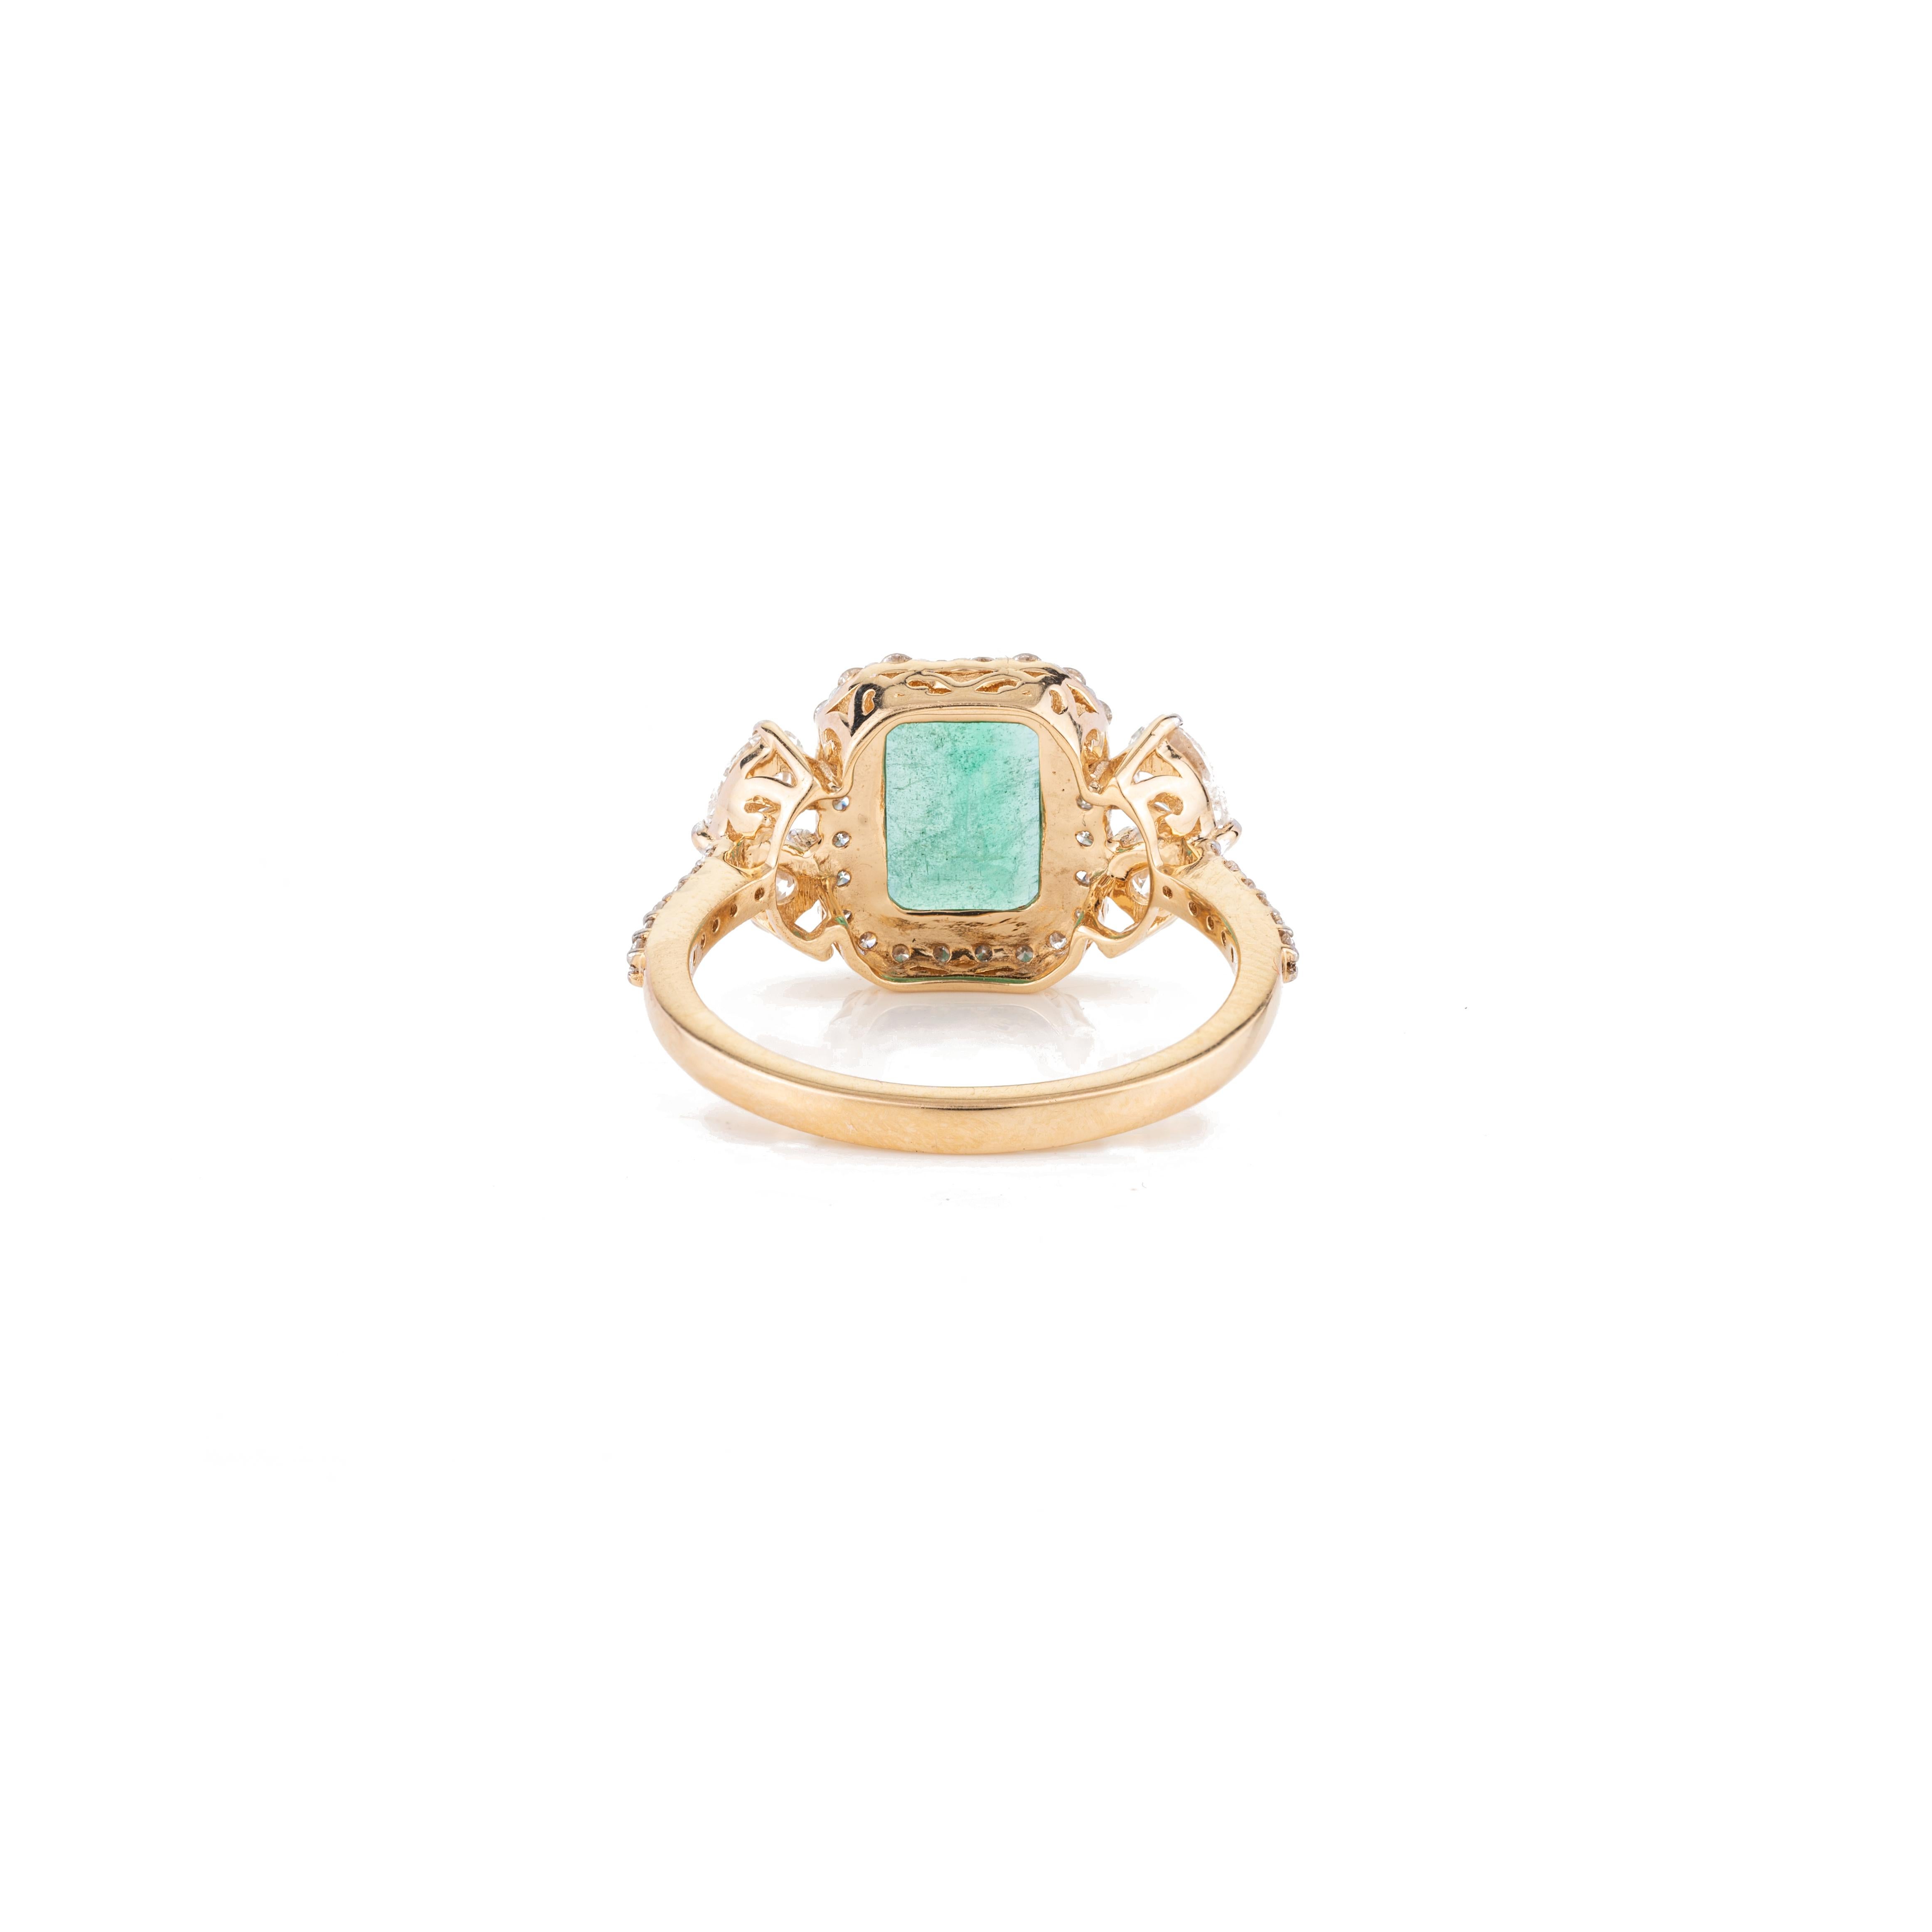 For Sale:  Designer Emerald Birthstone Diamond Big Cocktail Ring in 18k Solid Yellow Gold 5